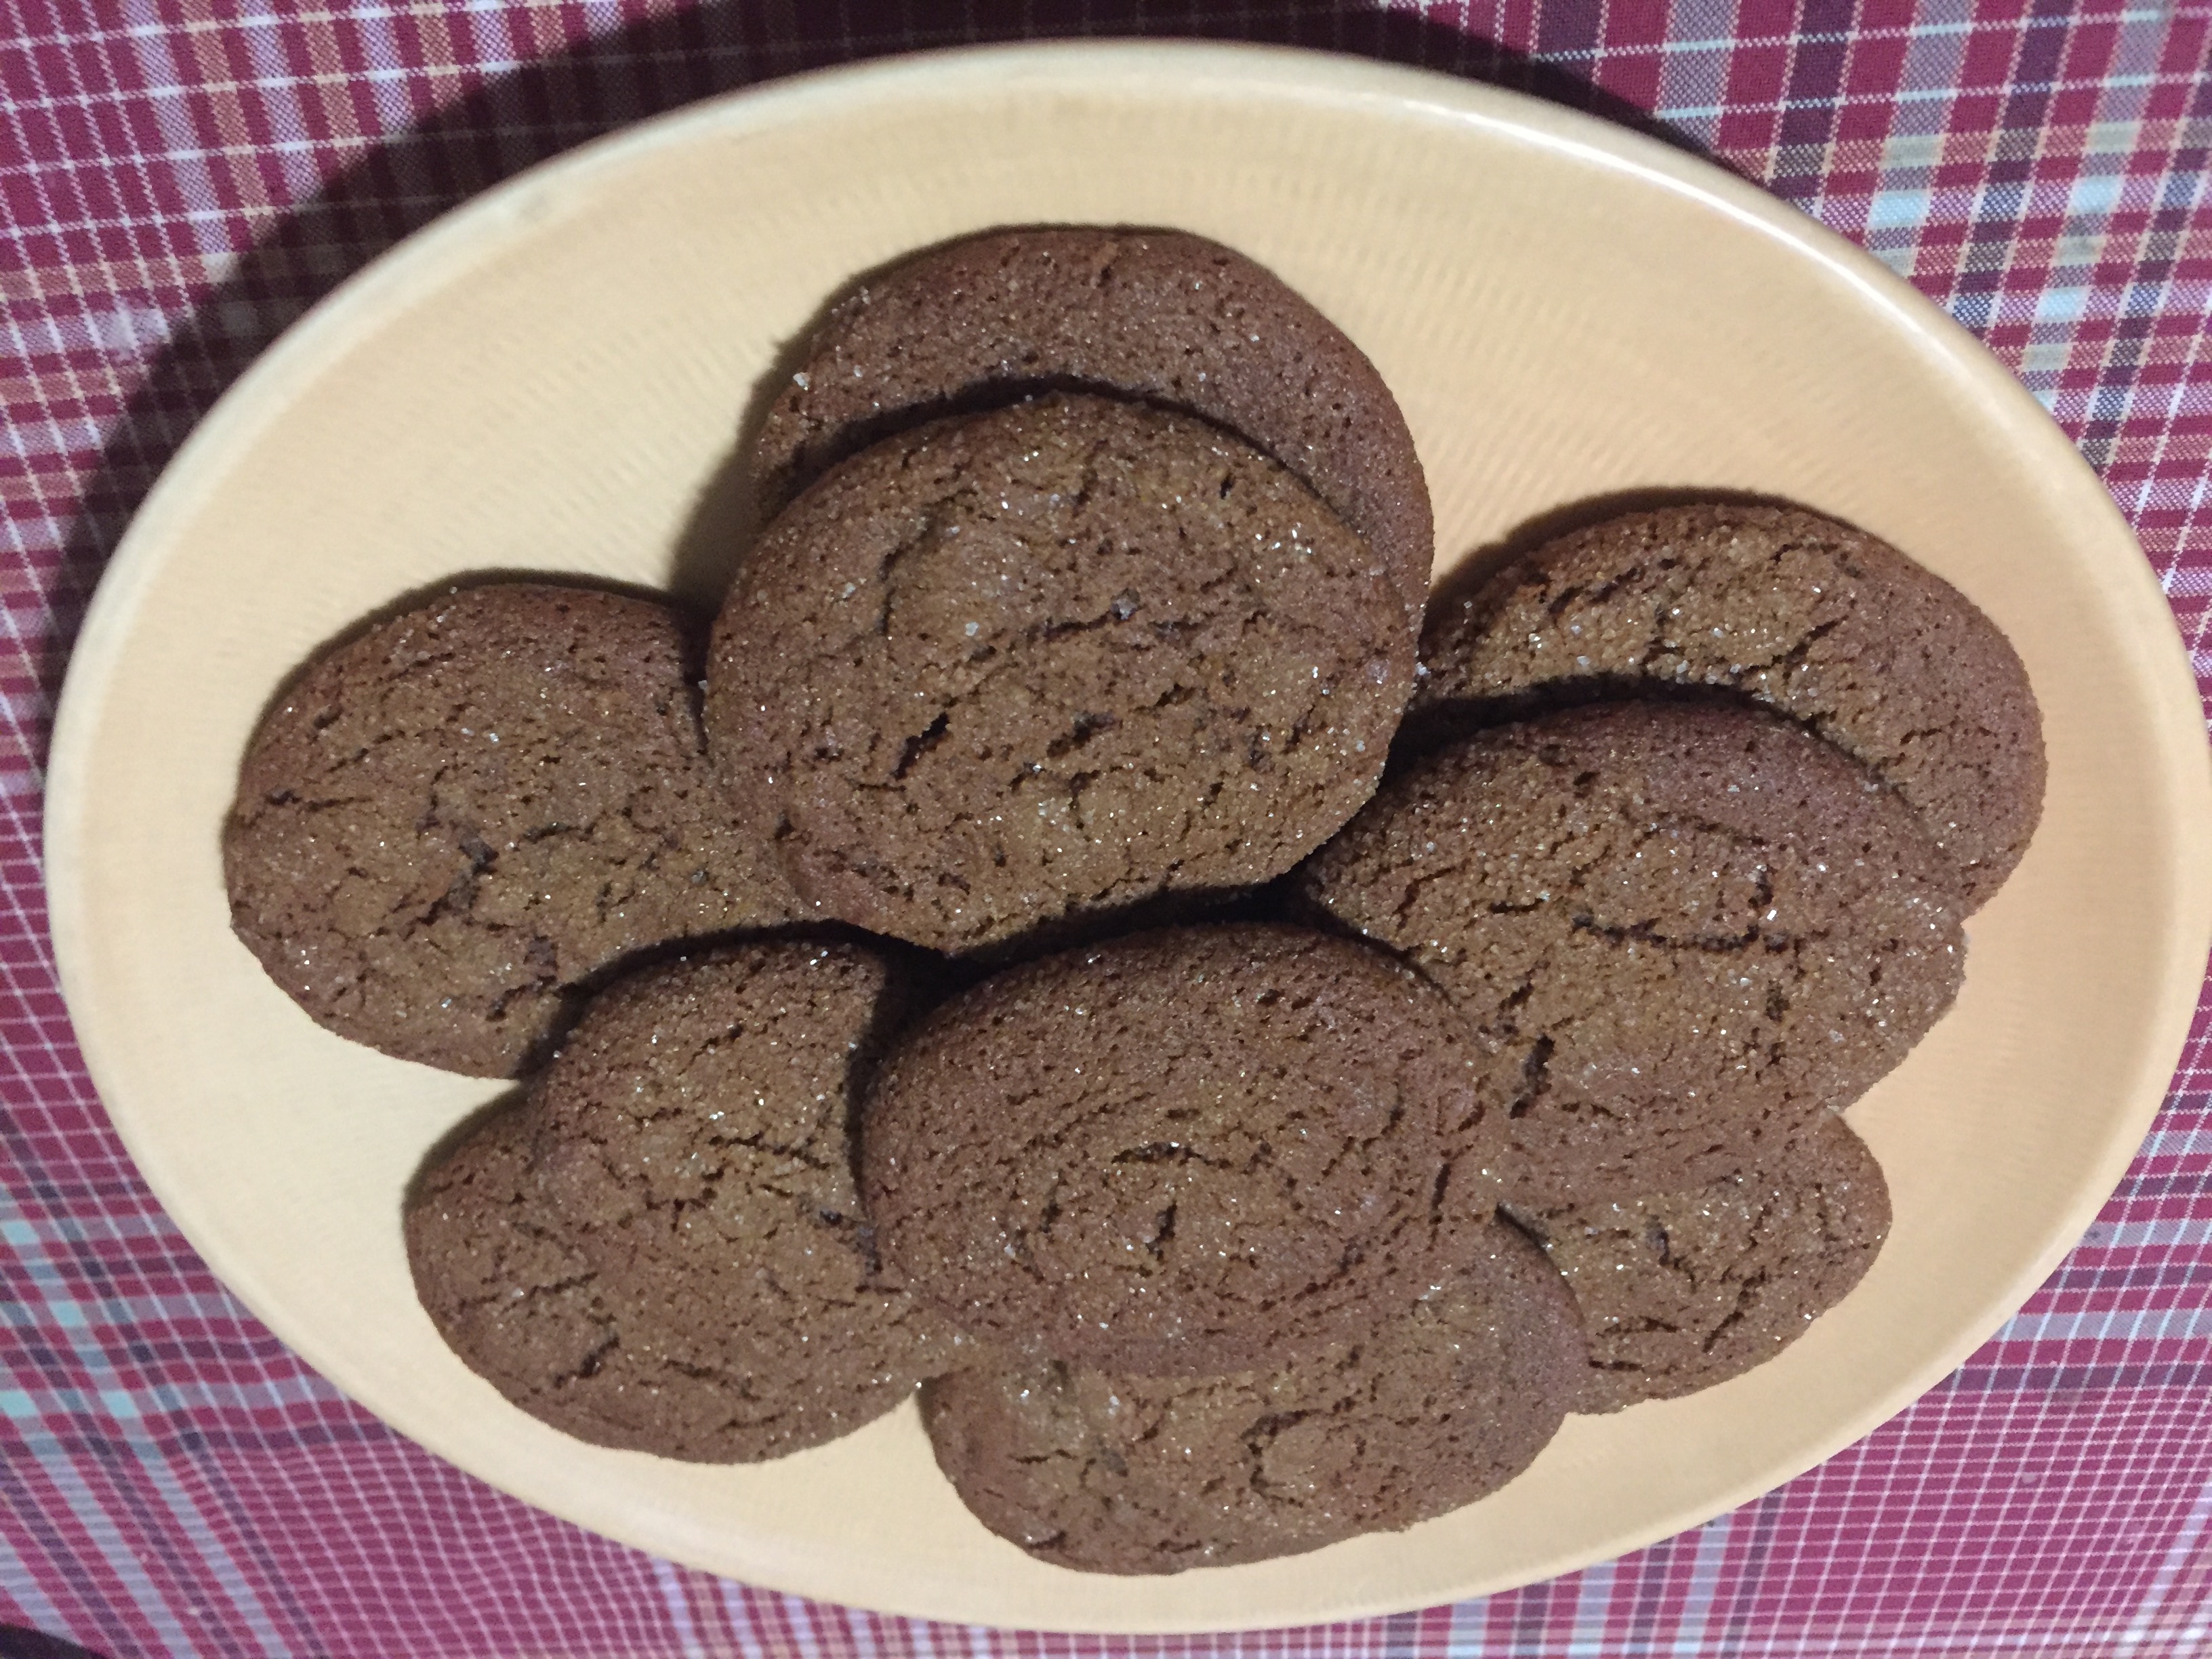 Ten round medium-sized cookies are arranged on a round yellow dish on a red-checked tablecloth.